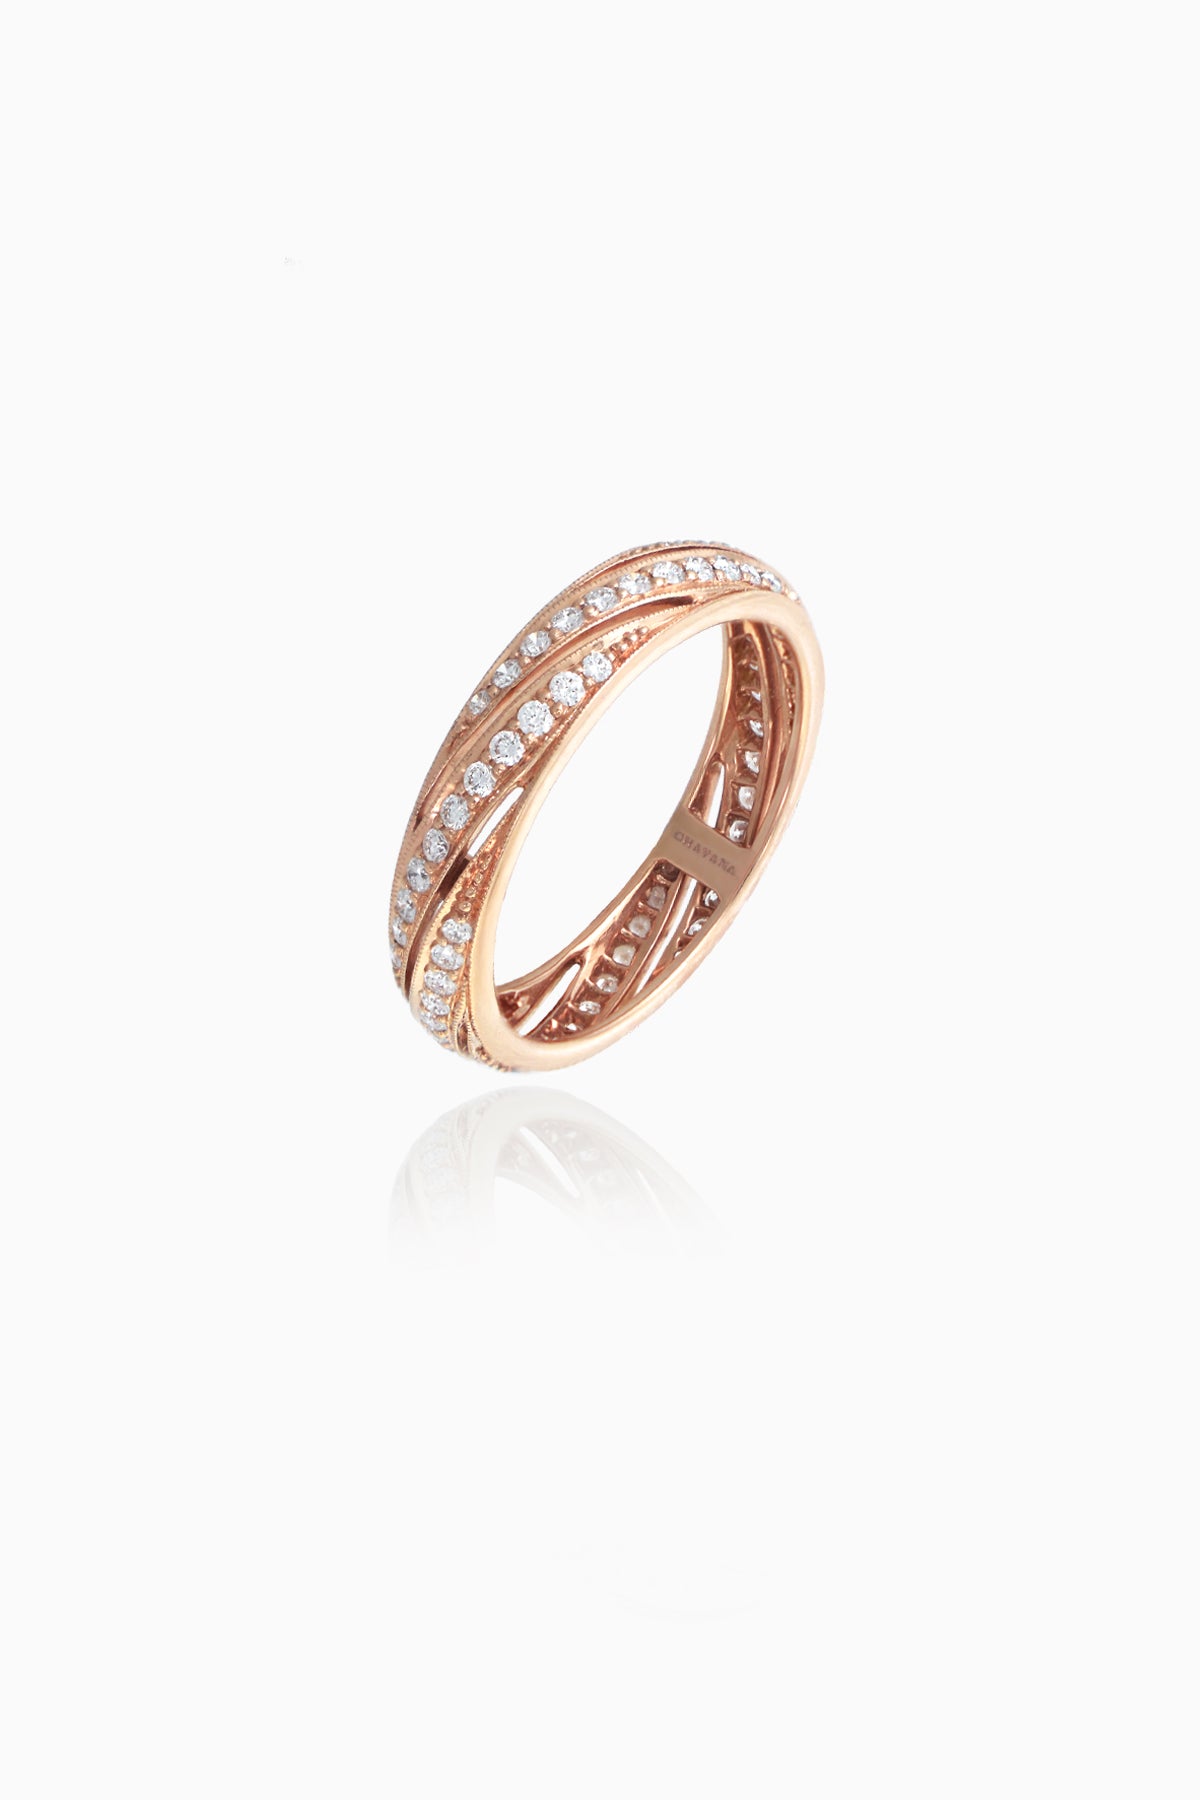 Ray of Light Band in Rose Gold